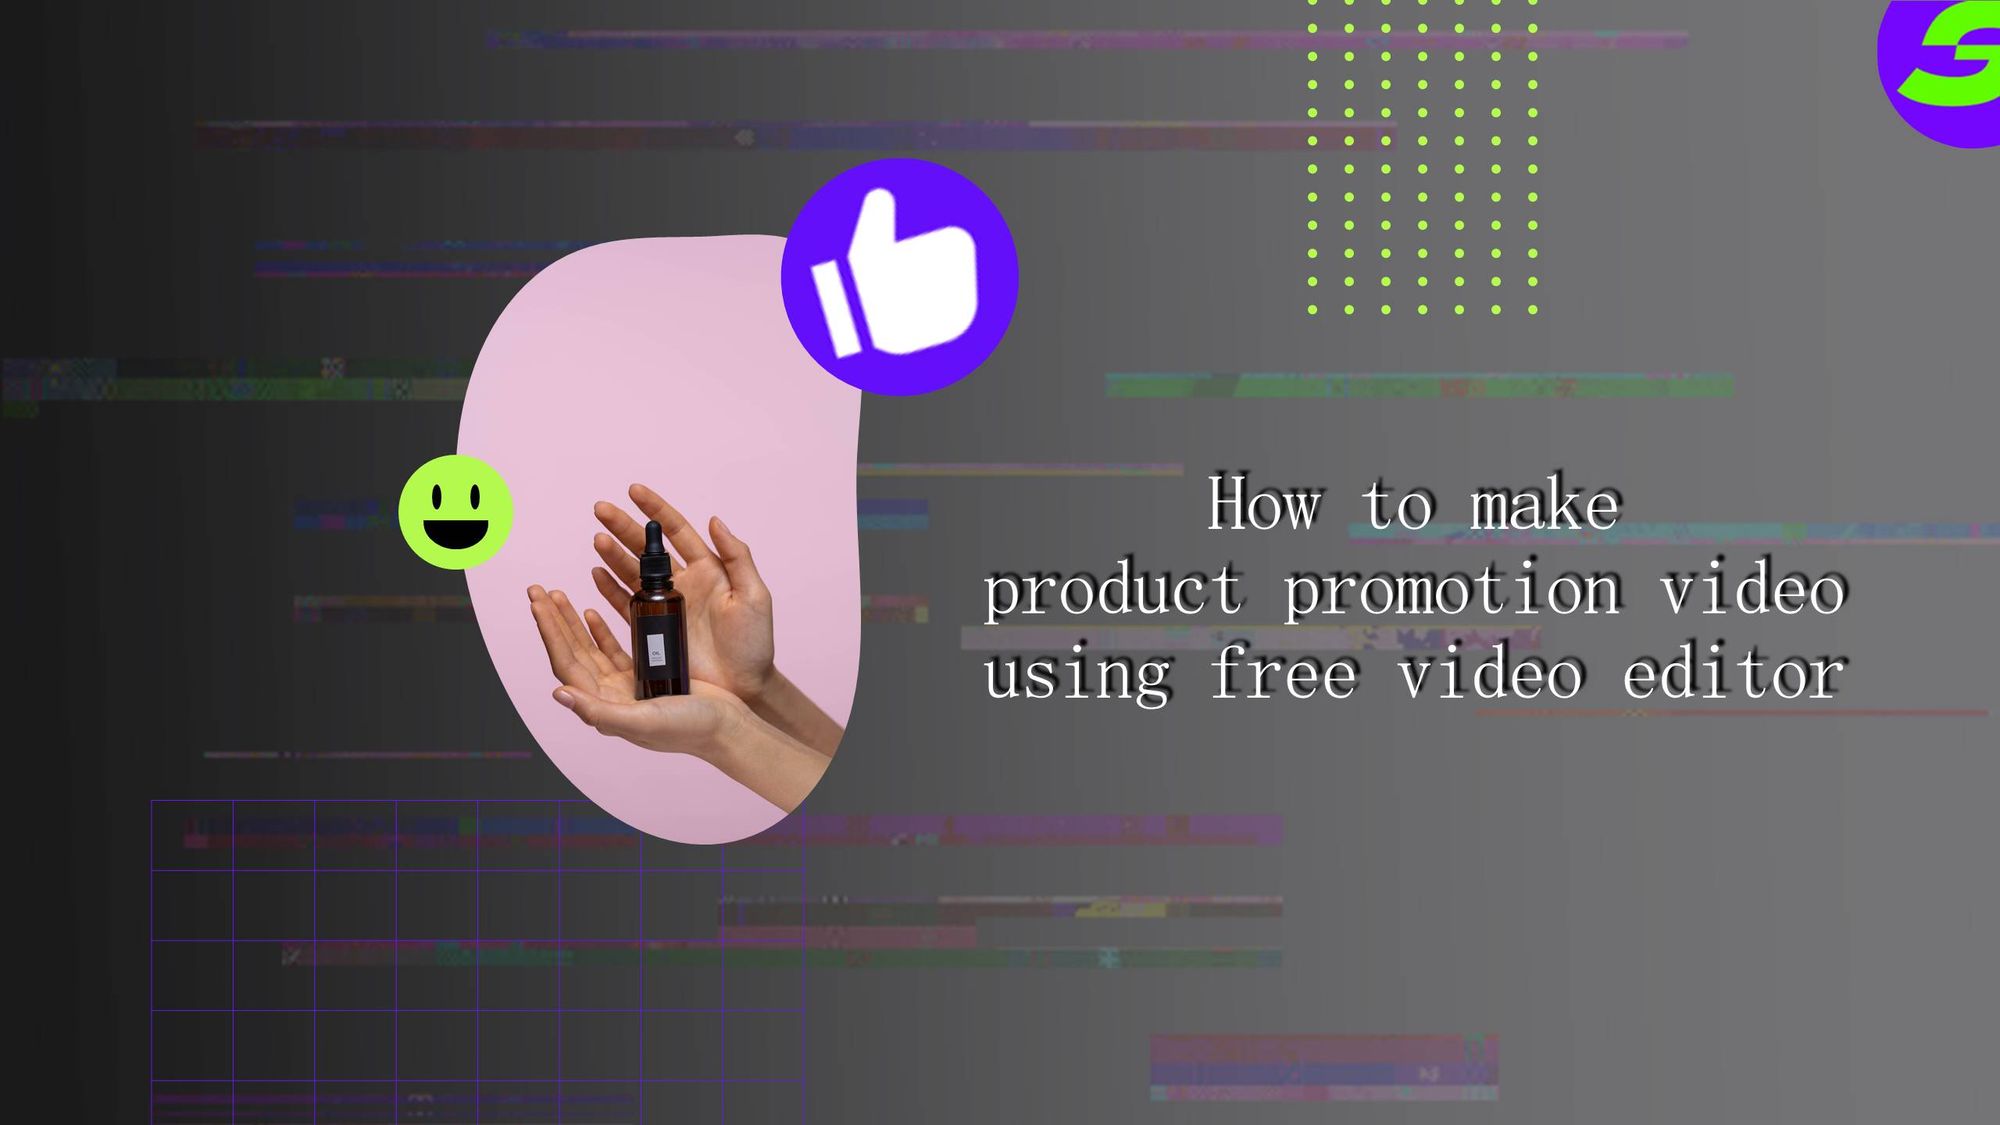 How to make product promotion video with free video editor